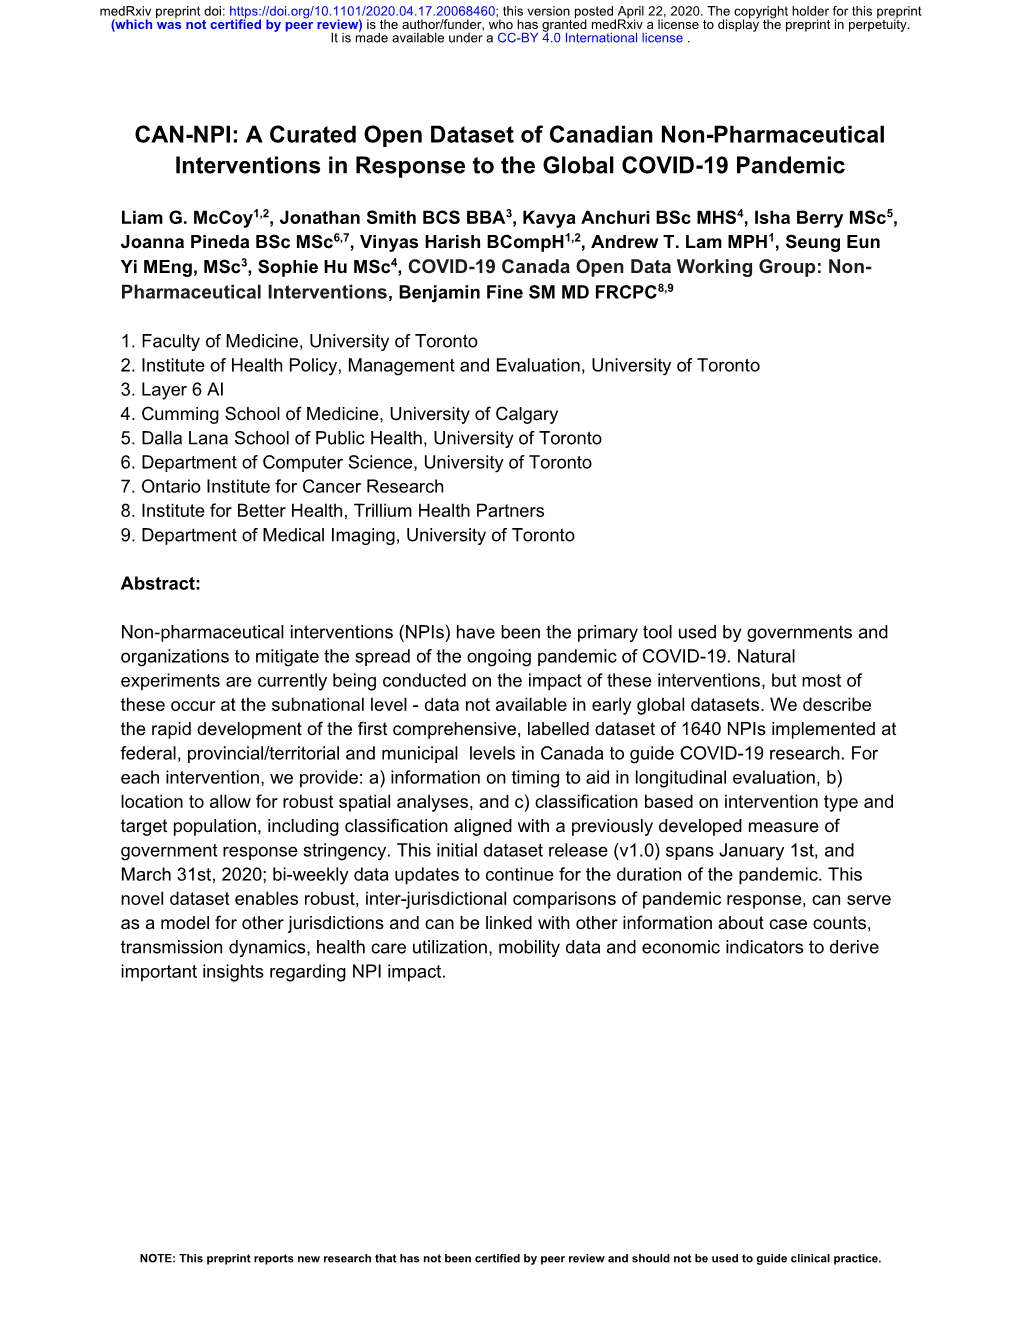 CAN-NPI: a Curated Open Dataset of Canadian Non-Pharmaceutical Interventions in Response to the Global COVID-19 Pandemic